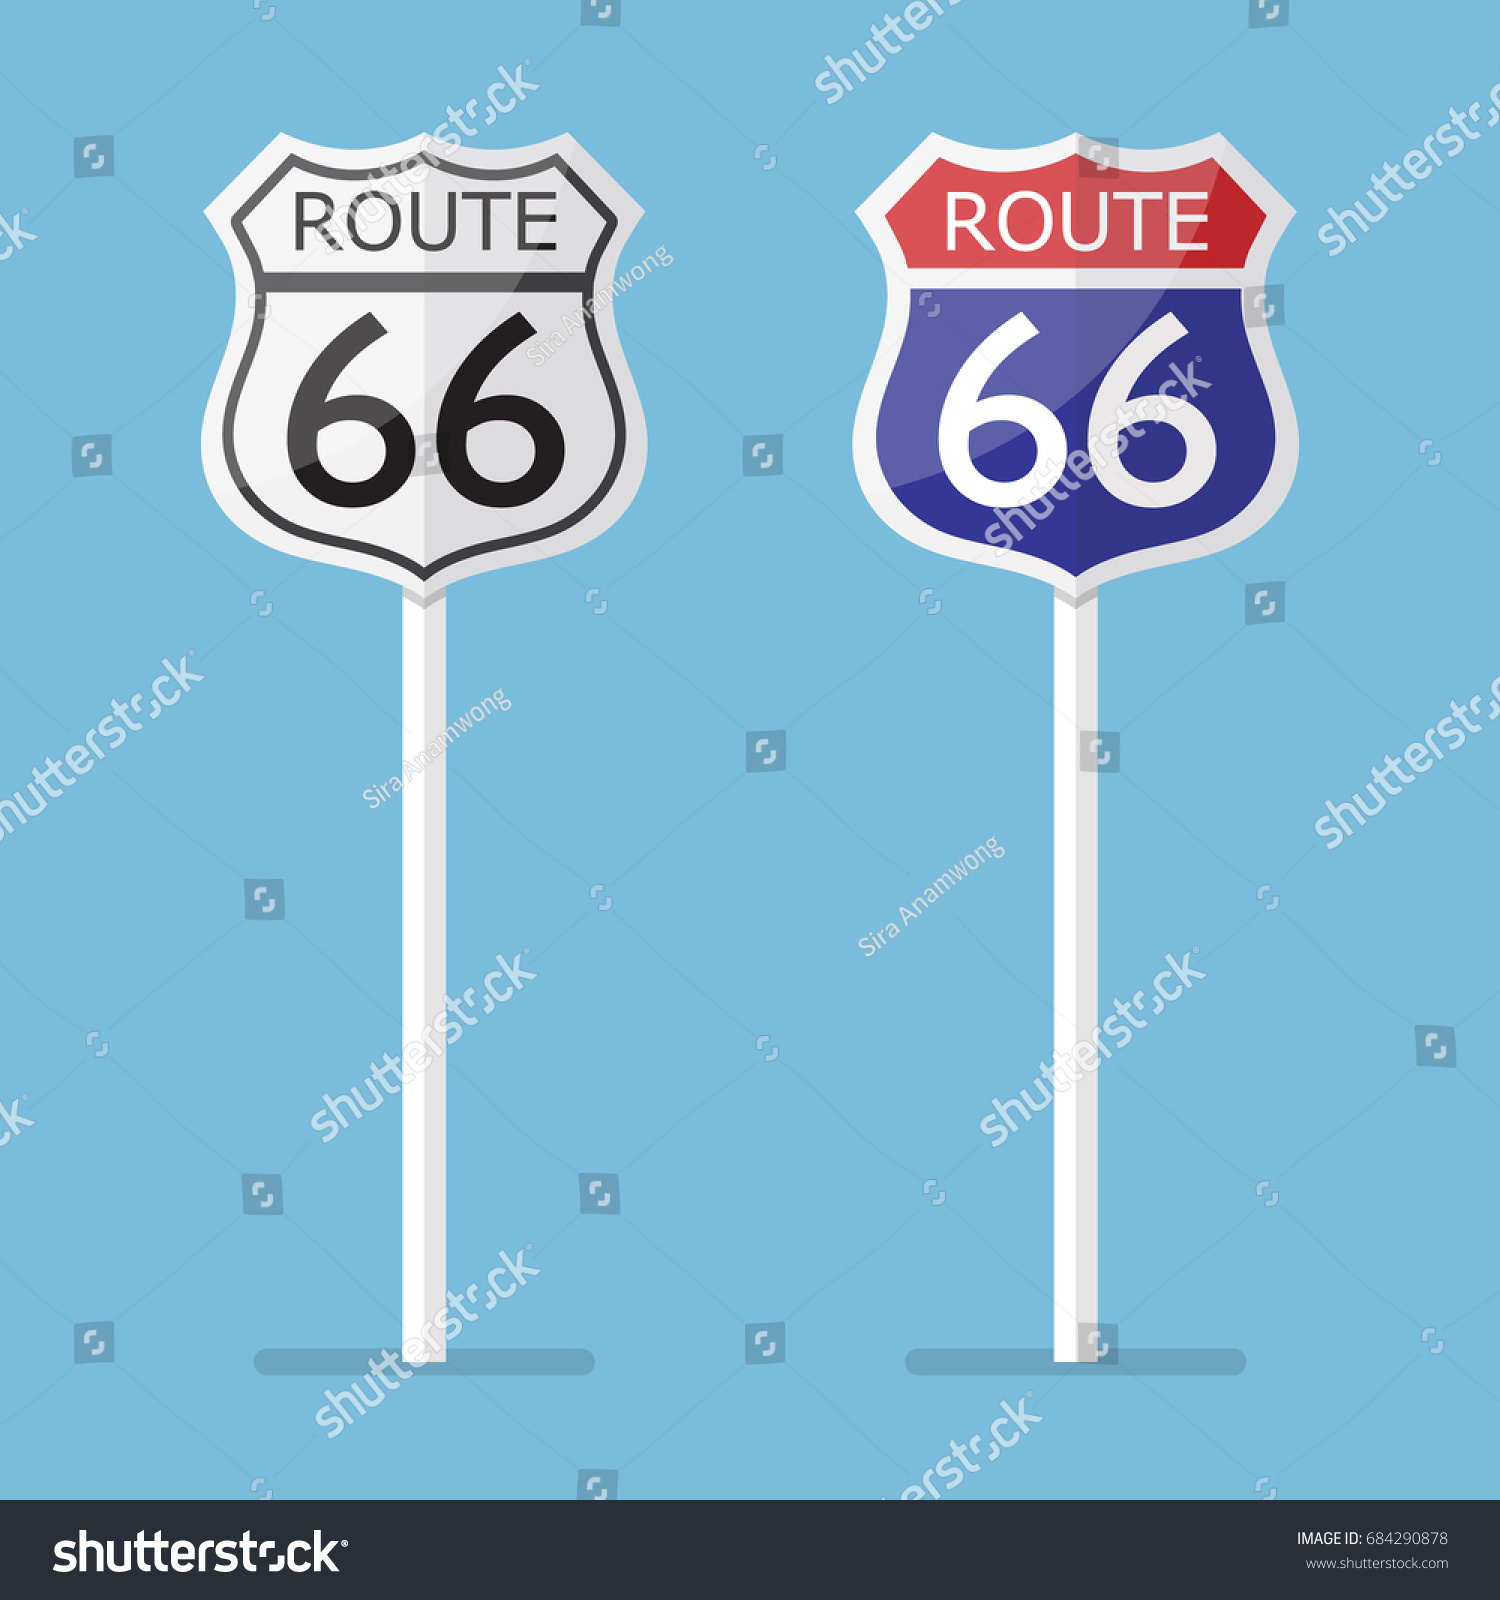 Route 66 Road Sign Set Vector Stock Vector Royalty Free